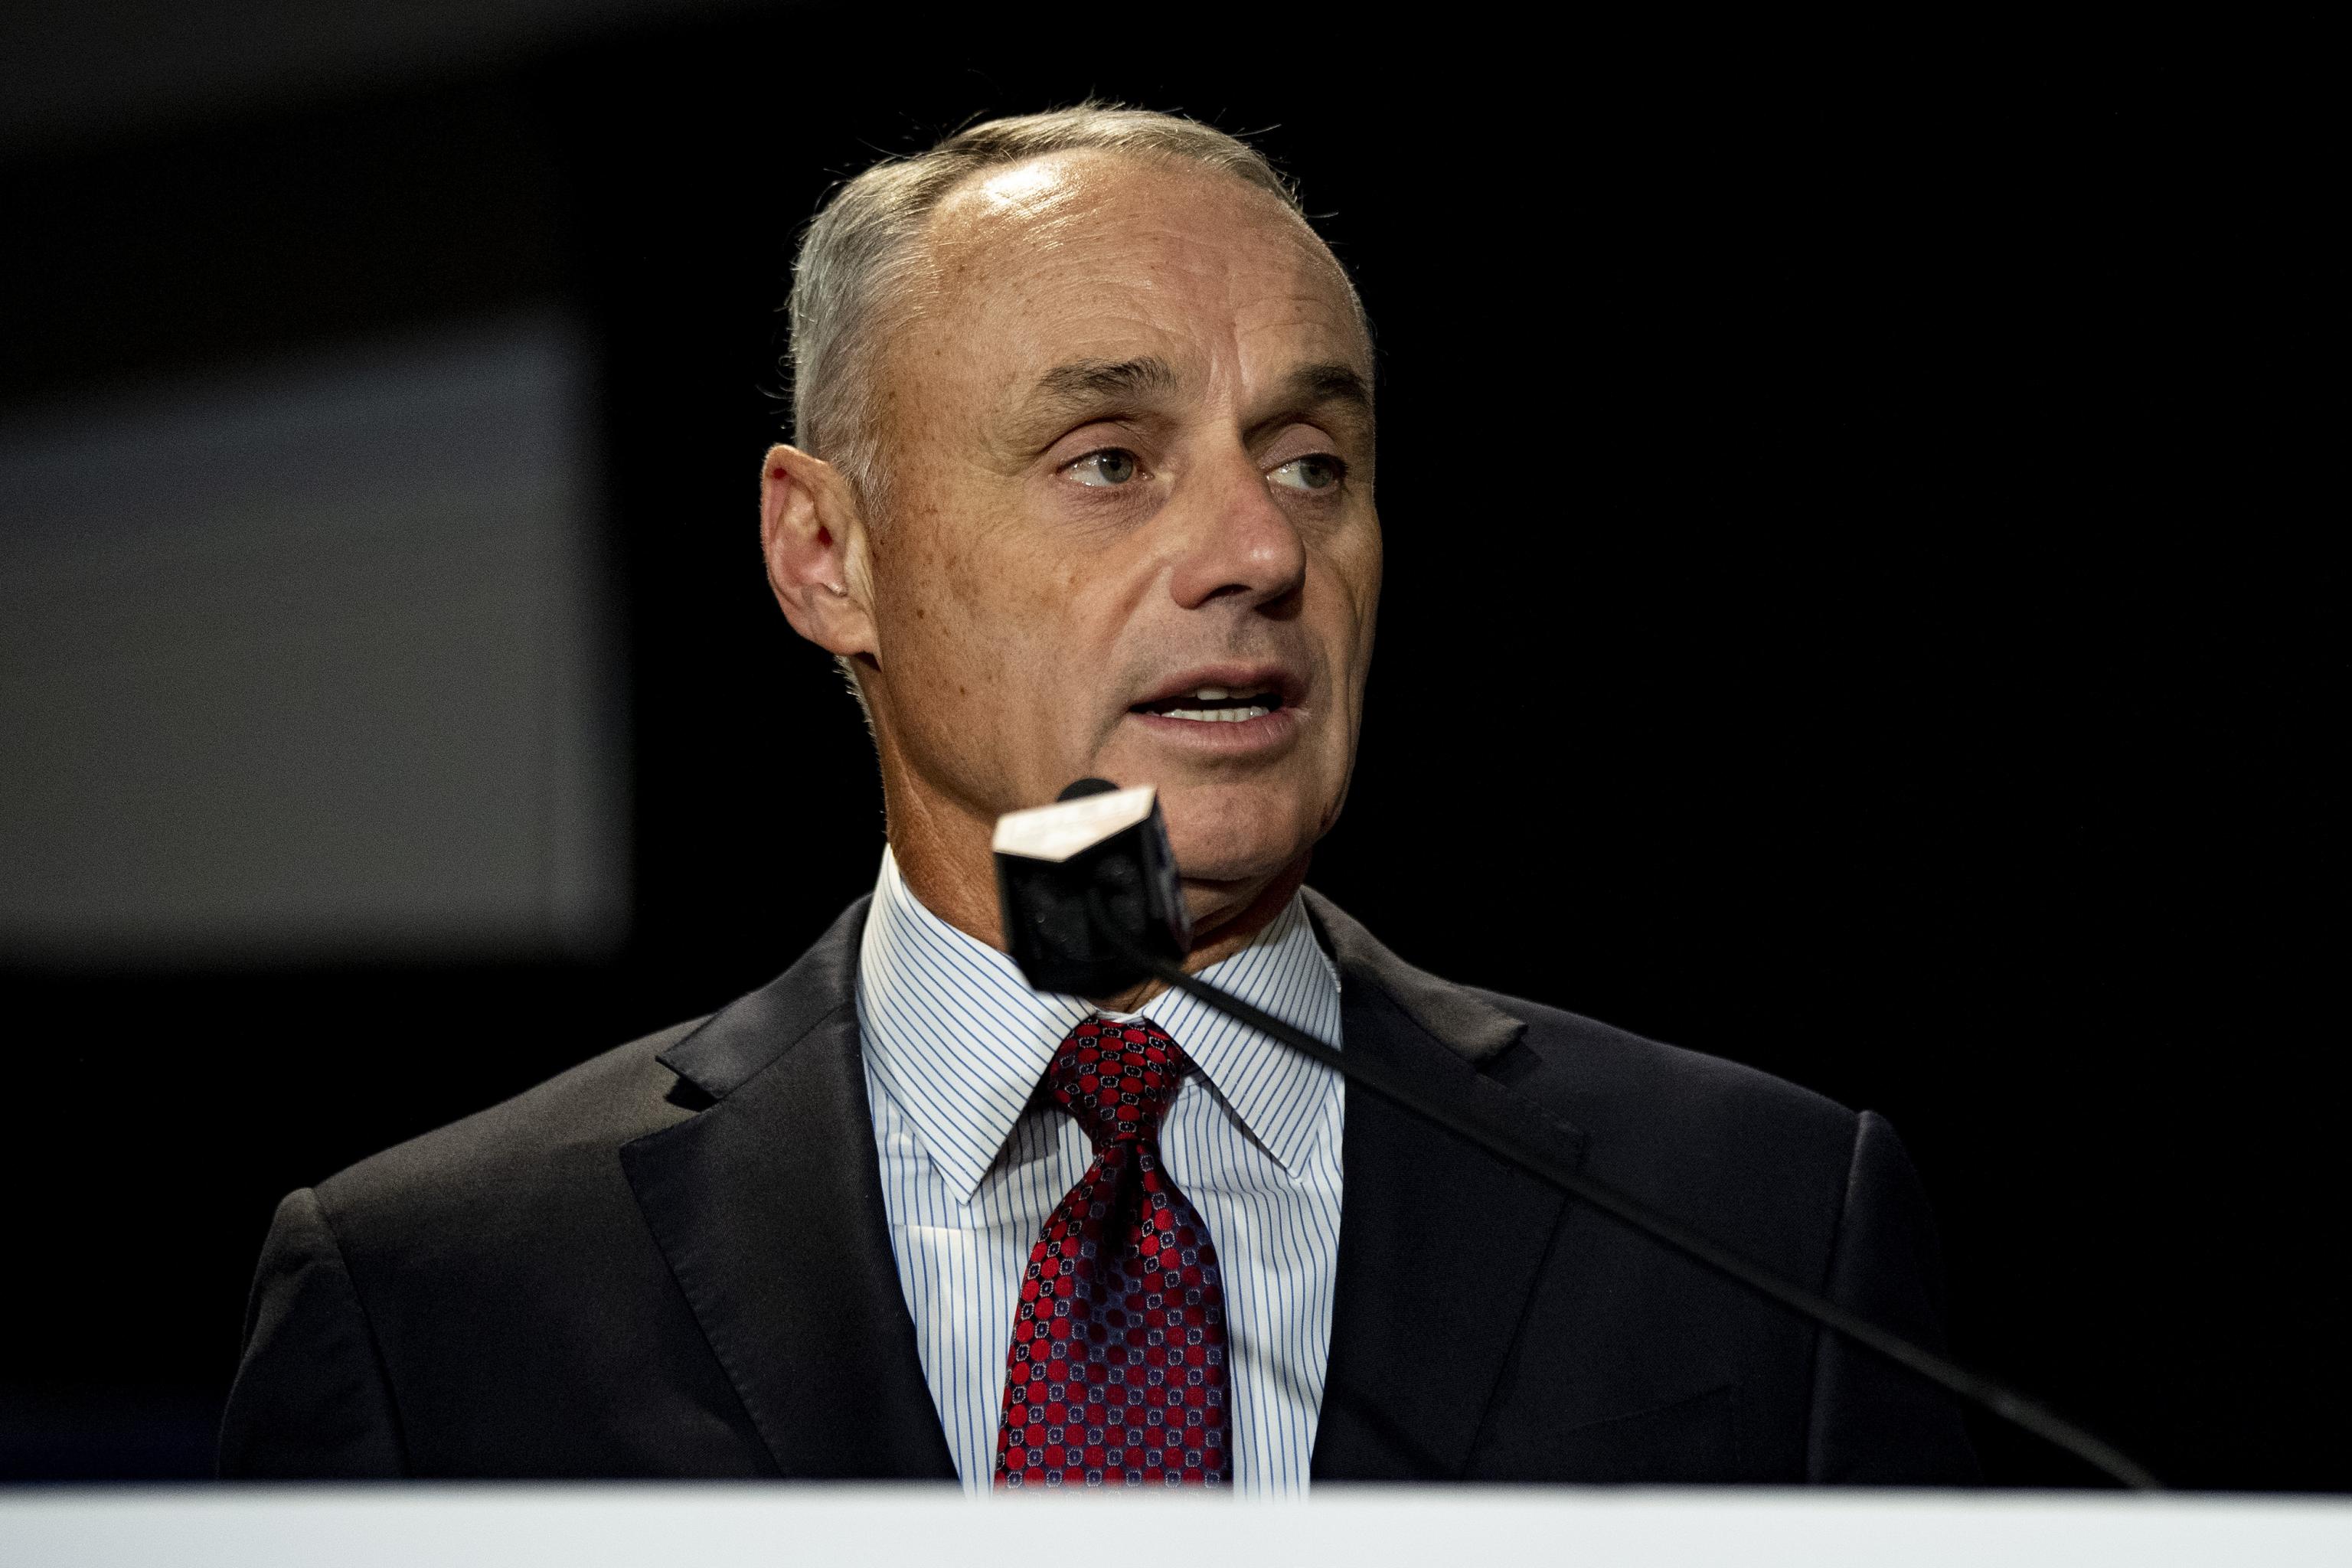 Rob Manfred Booed During Speech Presenting World Series MVP Trophy